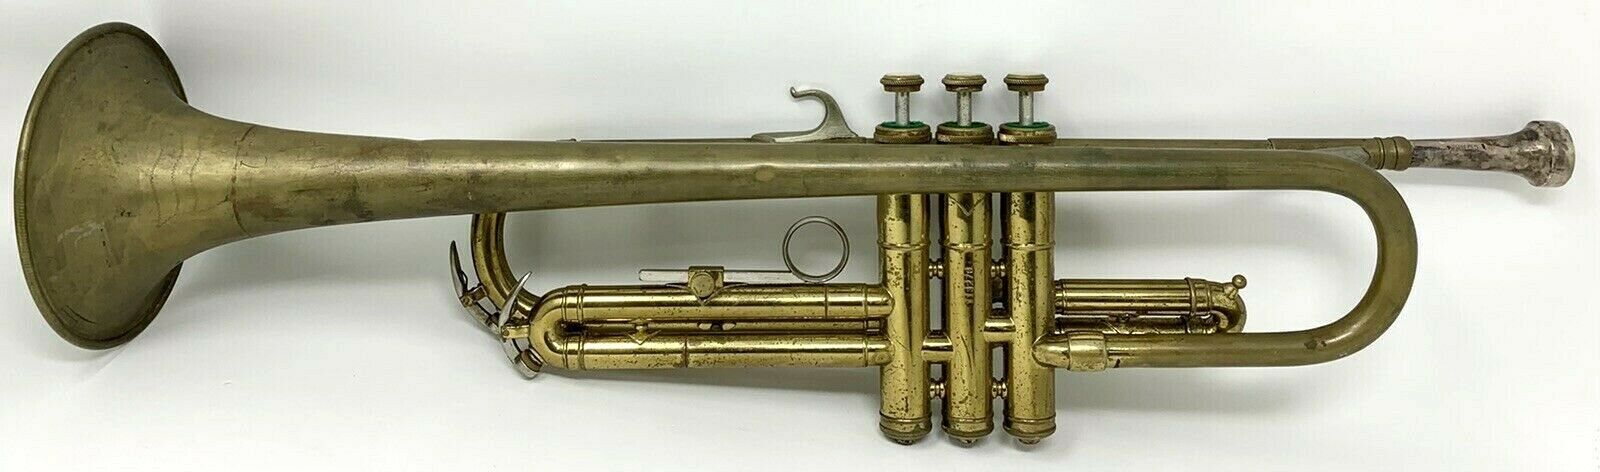 Rmc Indian Head The Martin Indiana Brass Trumpet - Rare Vintage